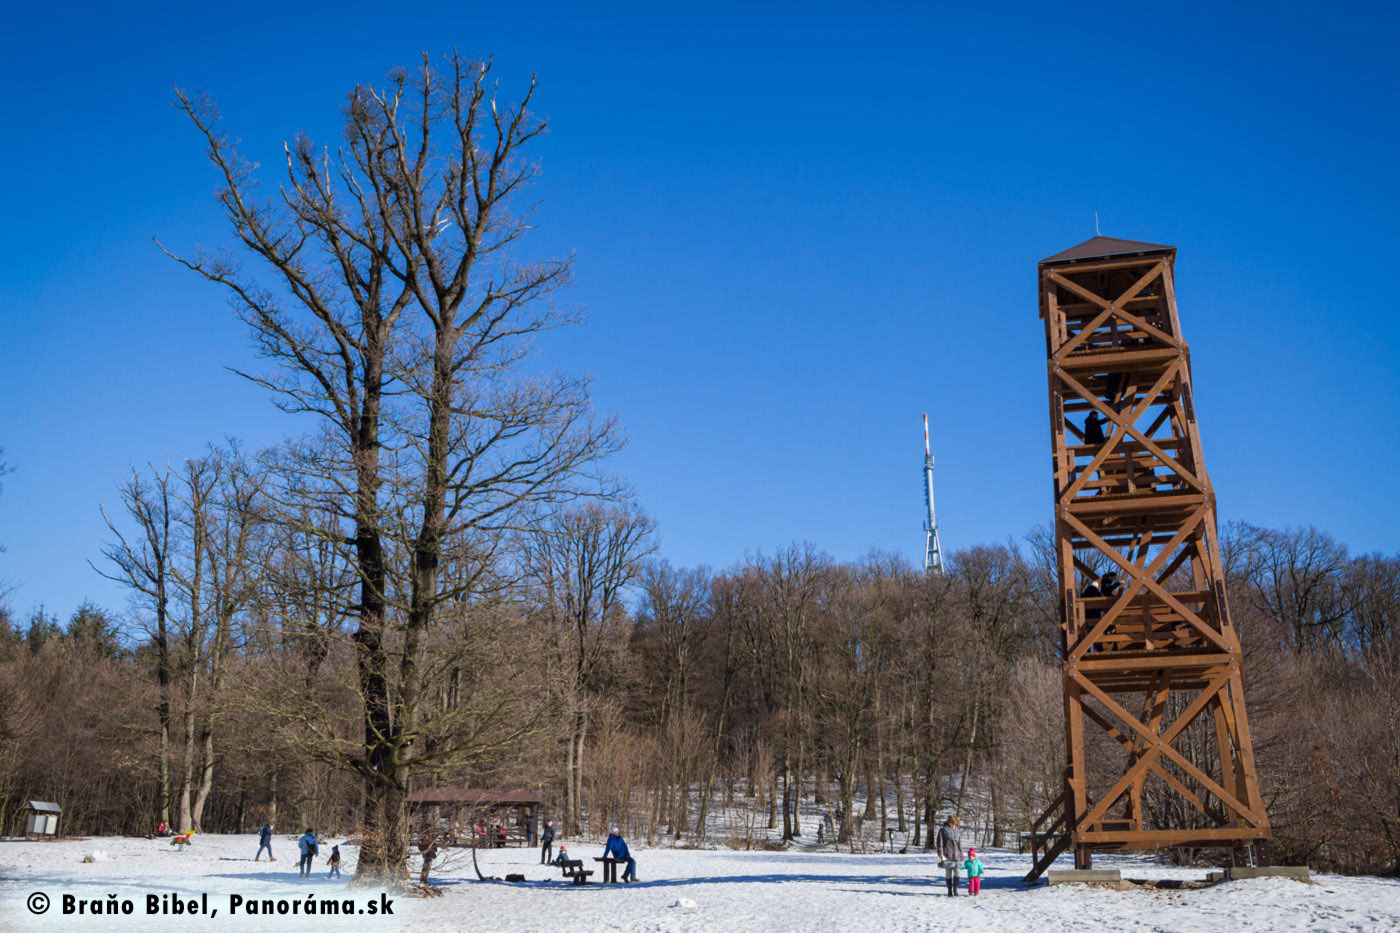 Wooden sightseeing tower in Bratislava forests in Winter